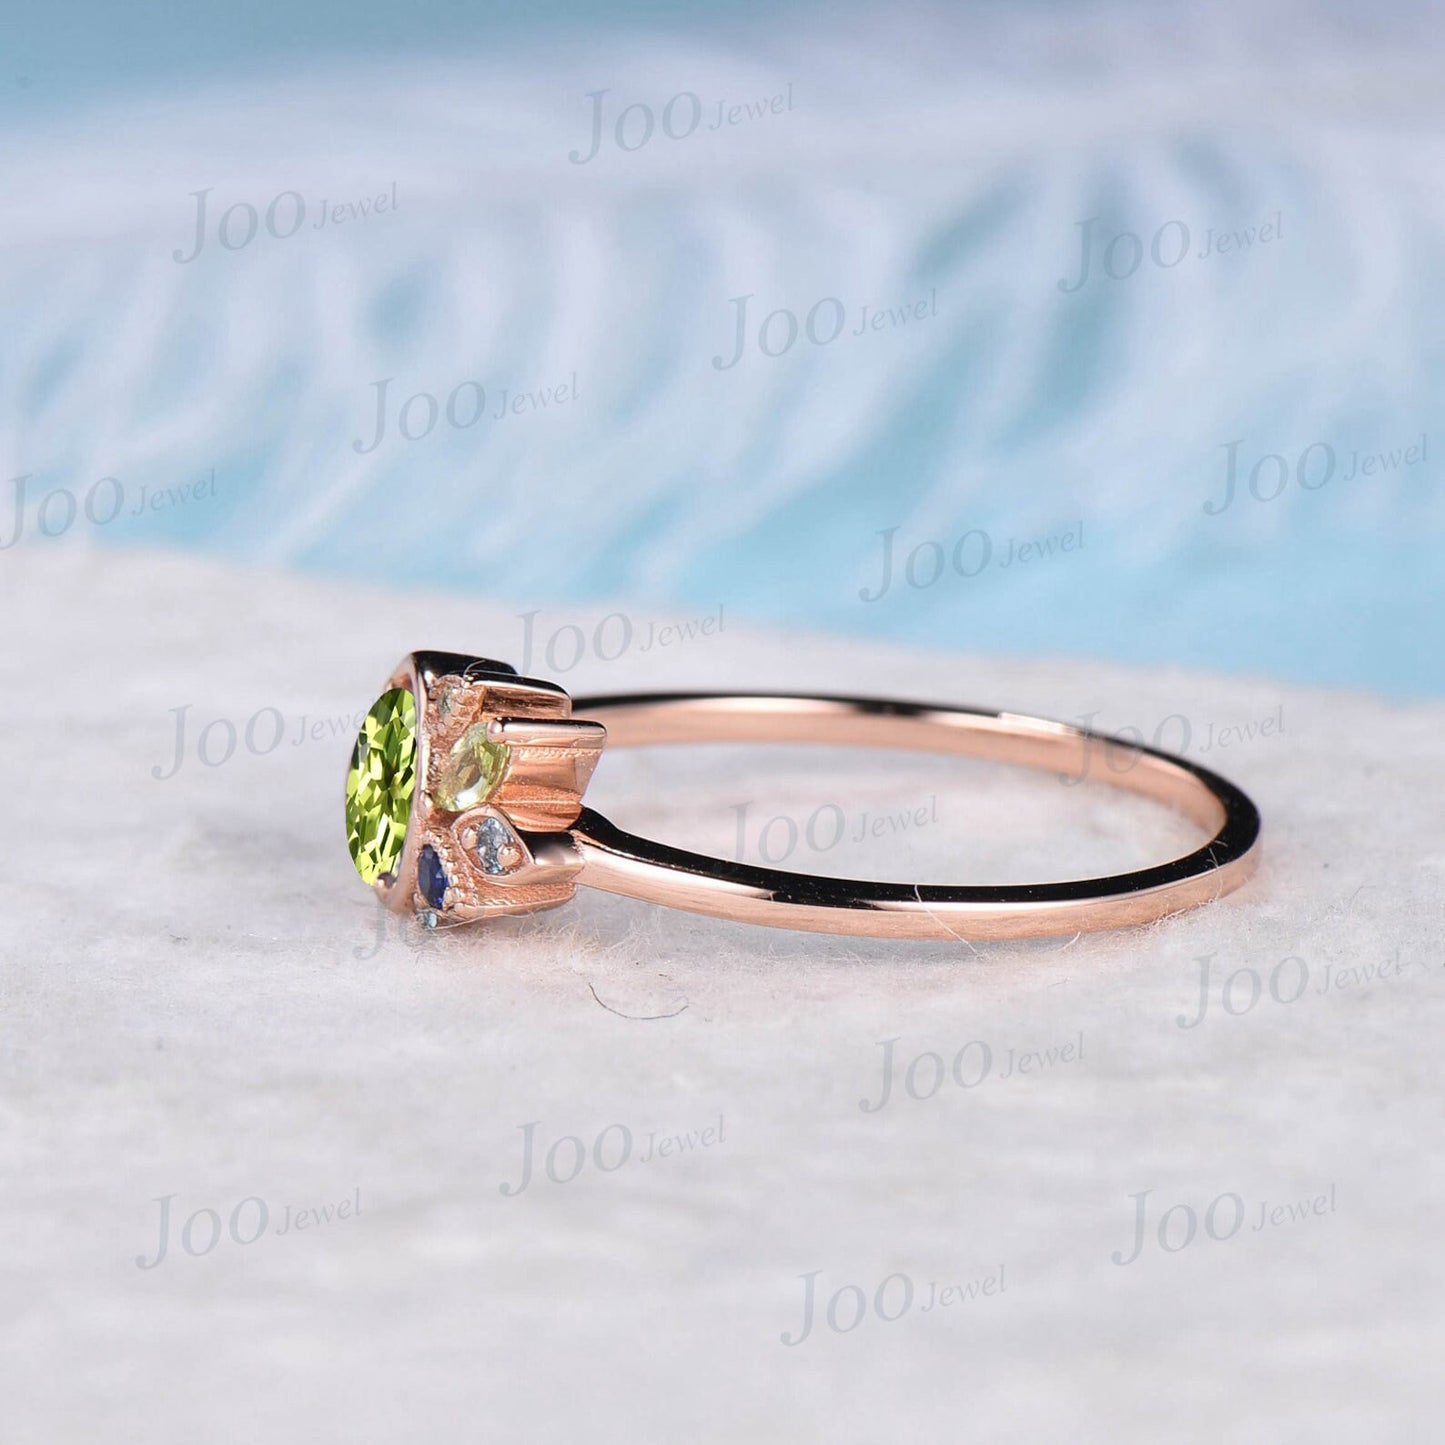 5mm Round Cut Natural Peridot Ring Green Gemstone Jewelry August Birthstone Moon Cluster Wedding Ring Personalized Anniversary/Birthday Gift